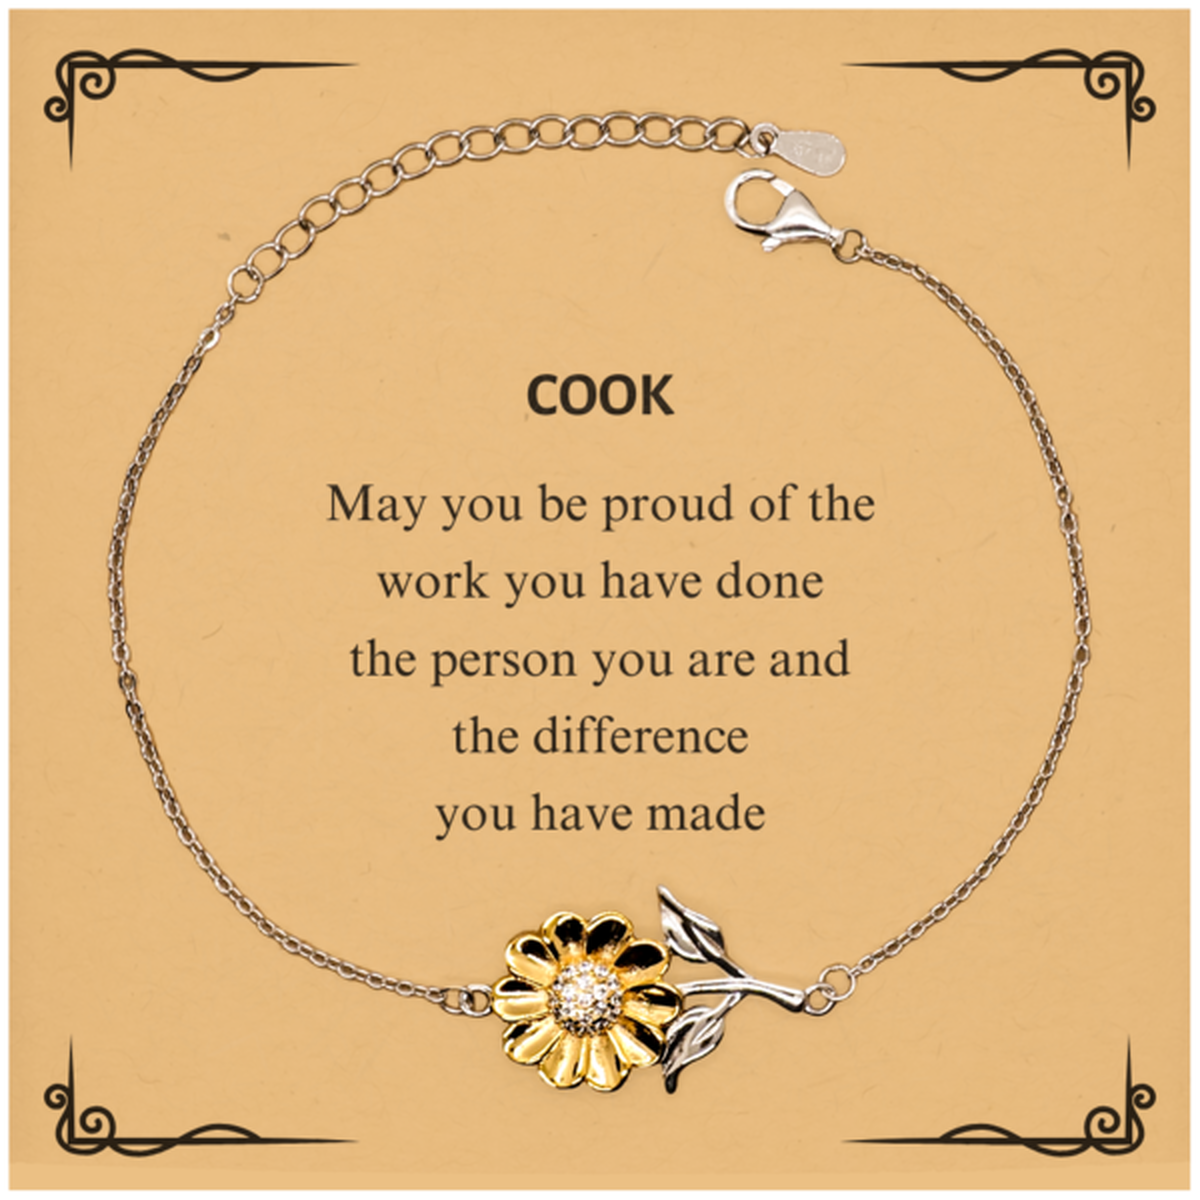 Cook May you be proud of the work you have done, Retirement Cook Sunflower Bracelet for Colleague Appreciation Gifts Amazing for Cook